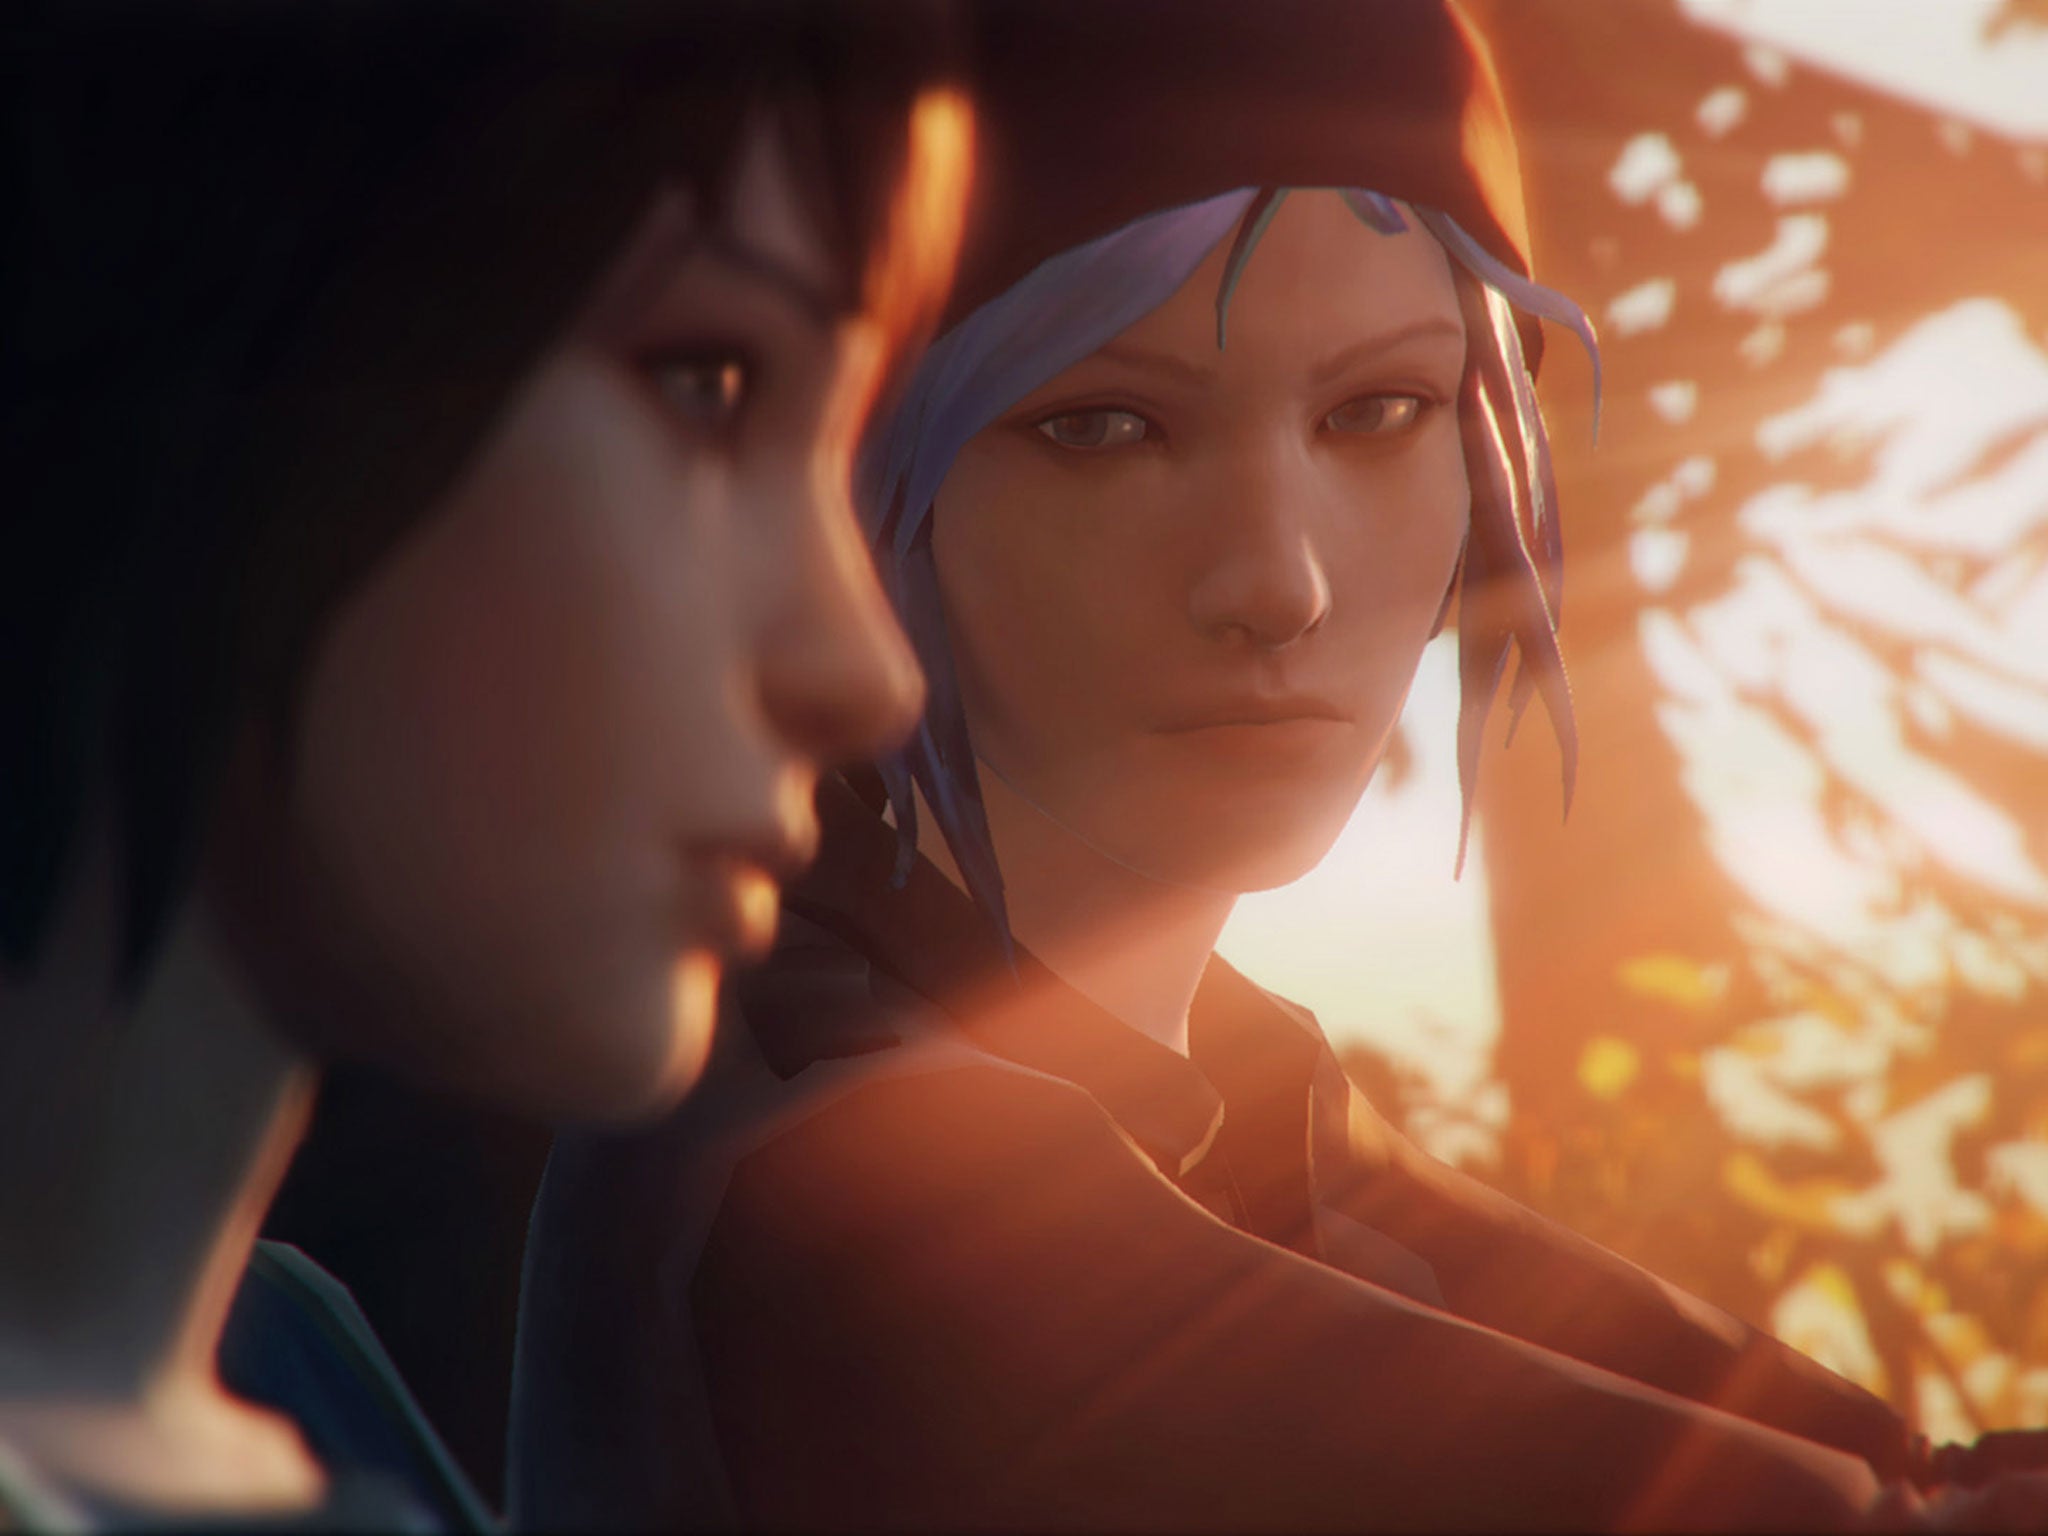 Life is Strange tackles subjects as diverse as friendships and the apocalypse with an emotional depth rarely seen in video games